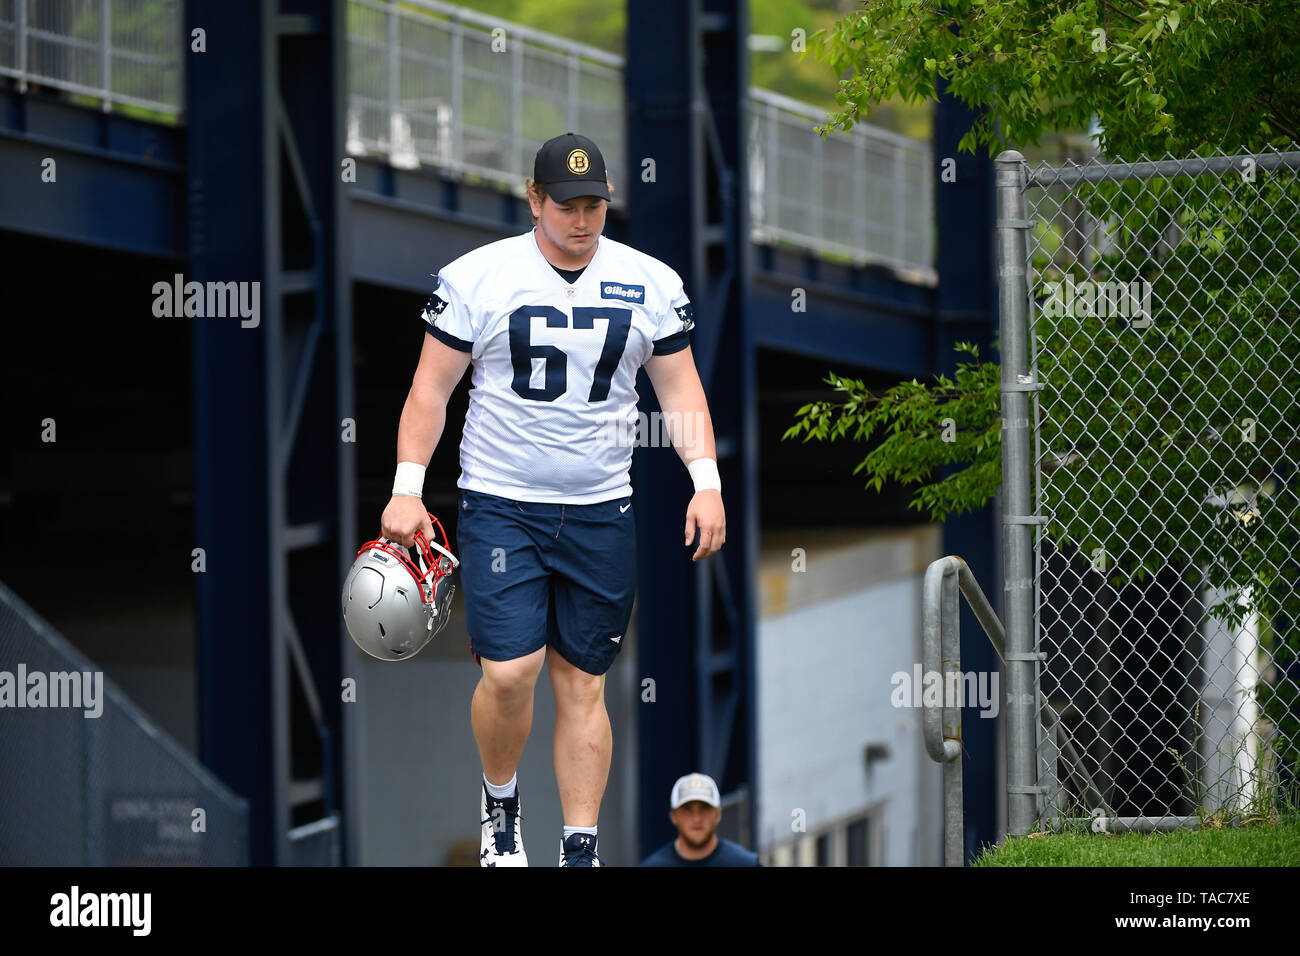 Foxborough, Massachusetts, USA. 23rd May, 2019. New England Patriots offensive tackle Tyler Gauthier (67) takes part in the the New England Patriots OTA held at Gillette Stadium, in Foxborough, Massachusetts. Eric Canha/CSM/Alamy Live News Stock Photo